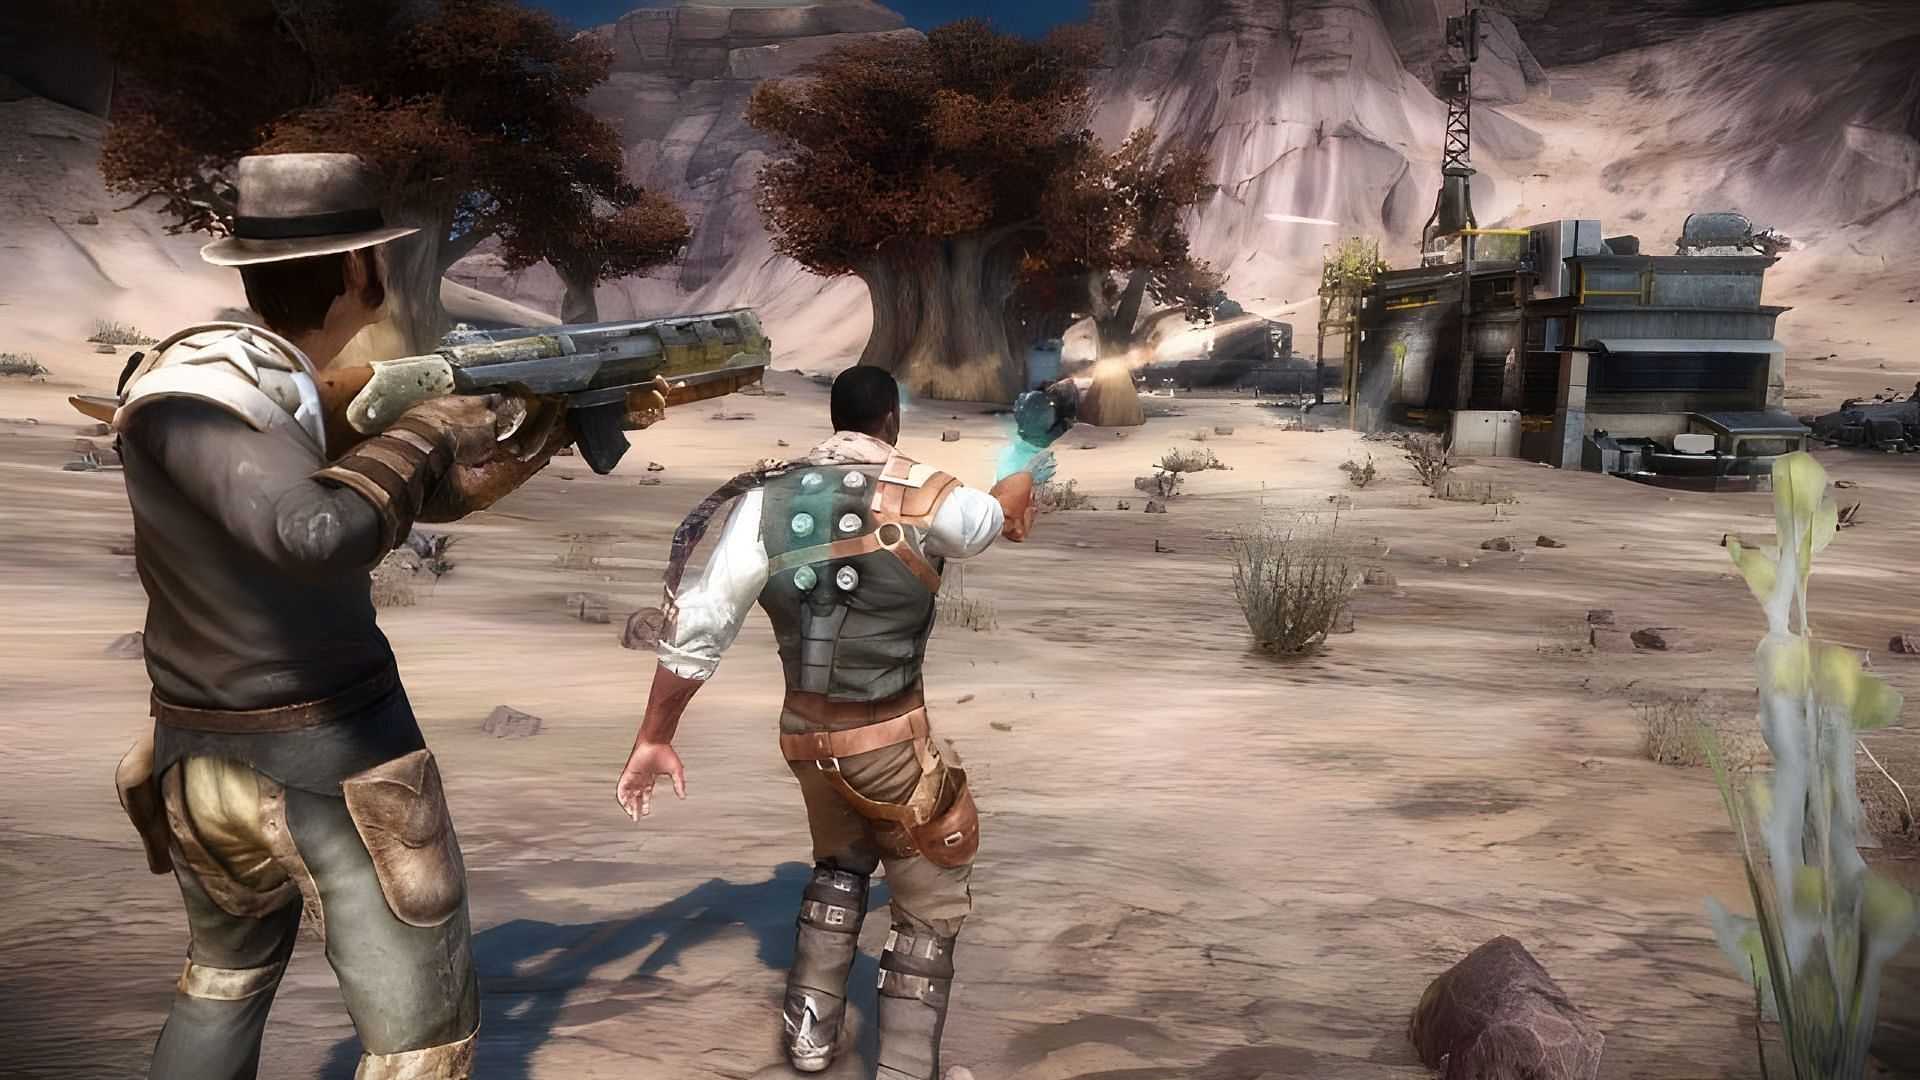 Starhawk was overlooked by the players even when it was near perfect (image via Sony Computer Interactive)